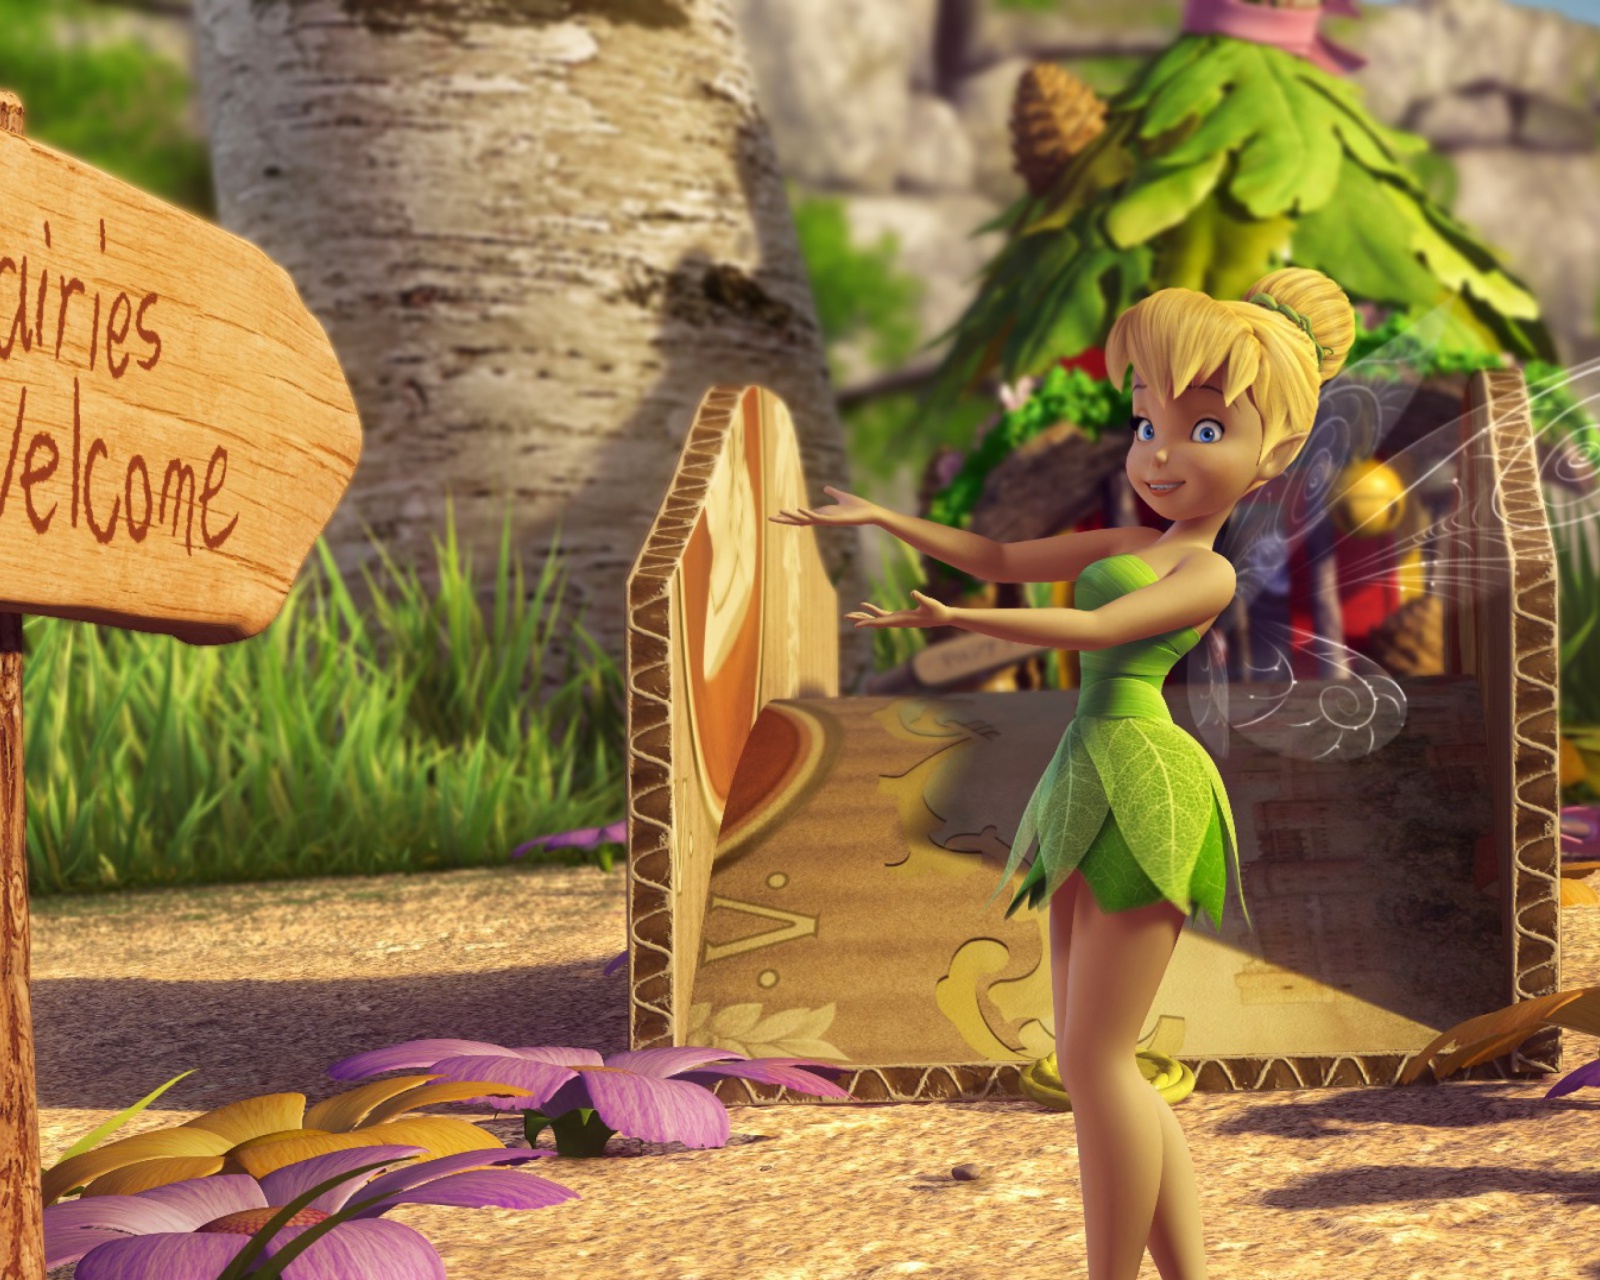 Tinker Bell And The Great Fairy Rescue 2 wallpaper 1600x1280